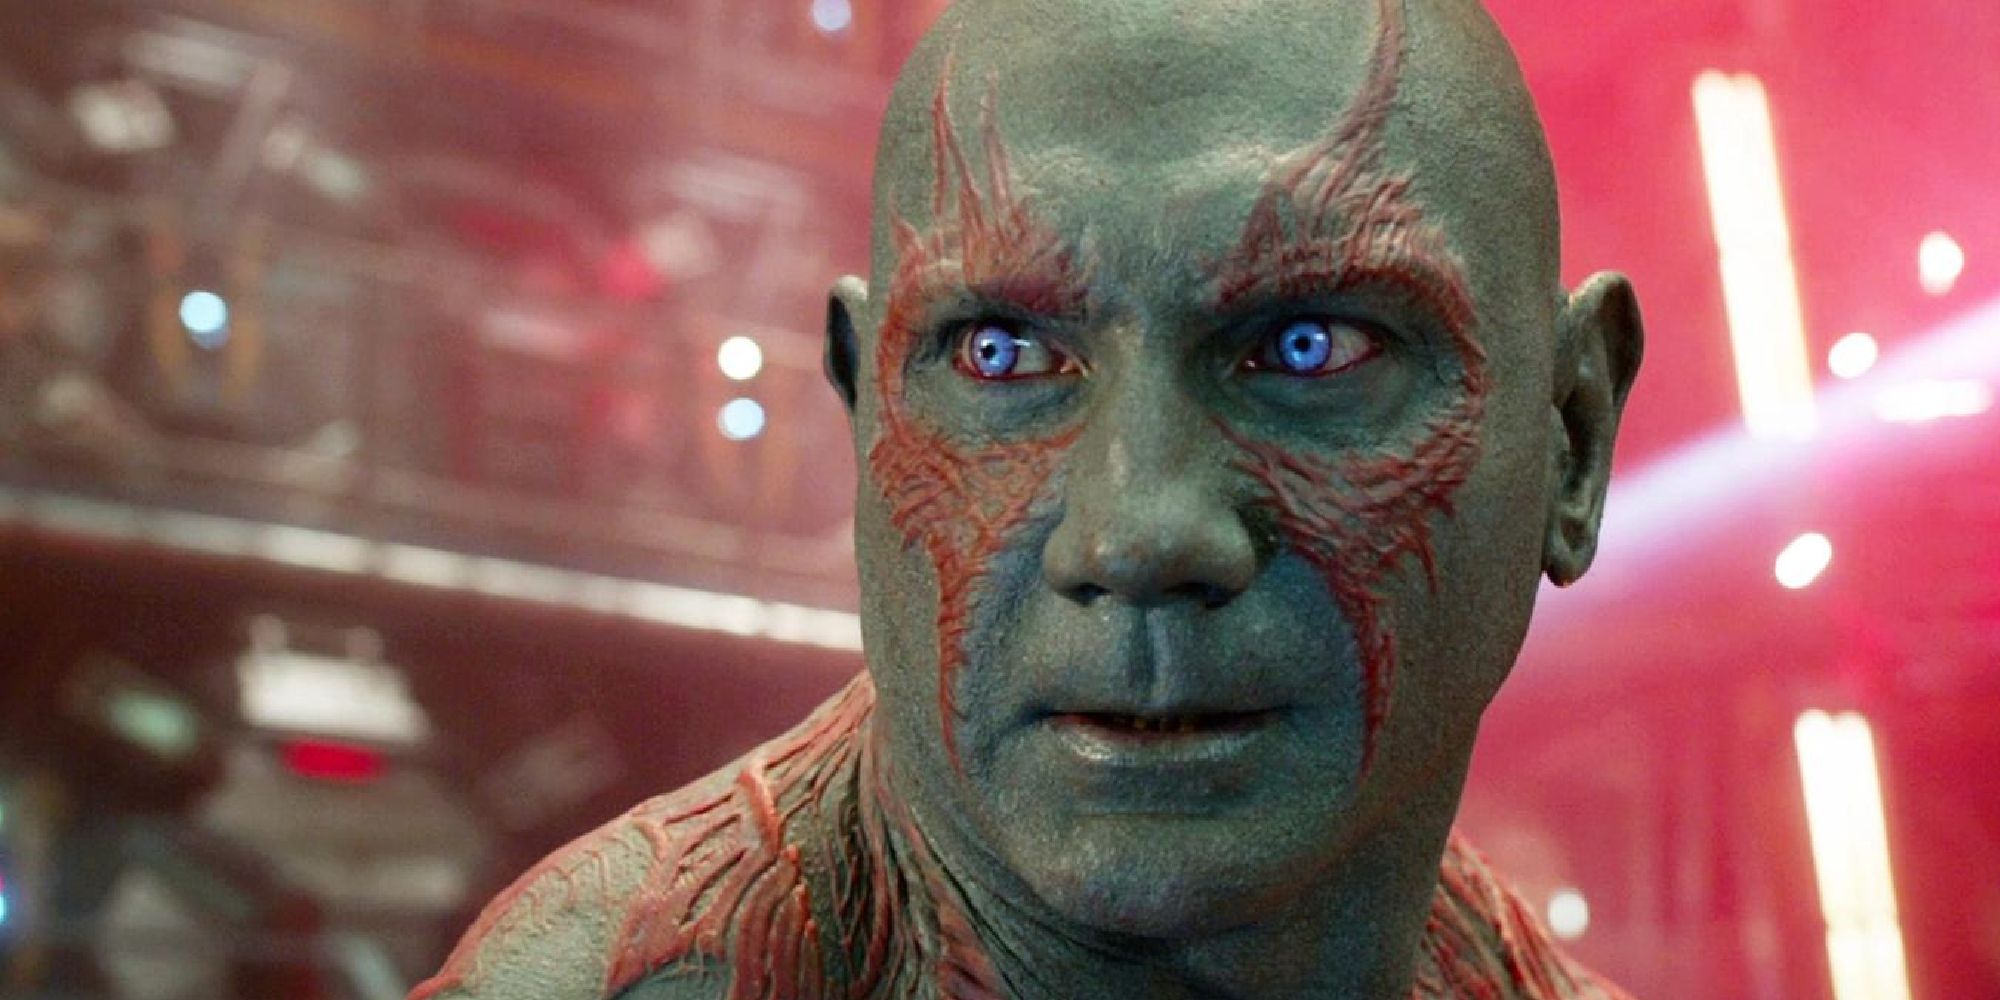 Dave Bautista in 'Guardians of the Galaxy vol. 2'